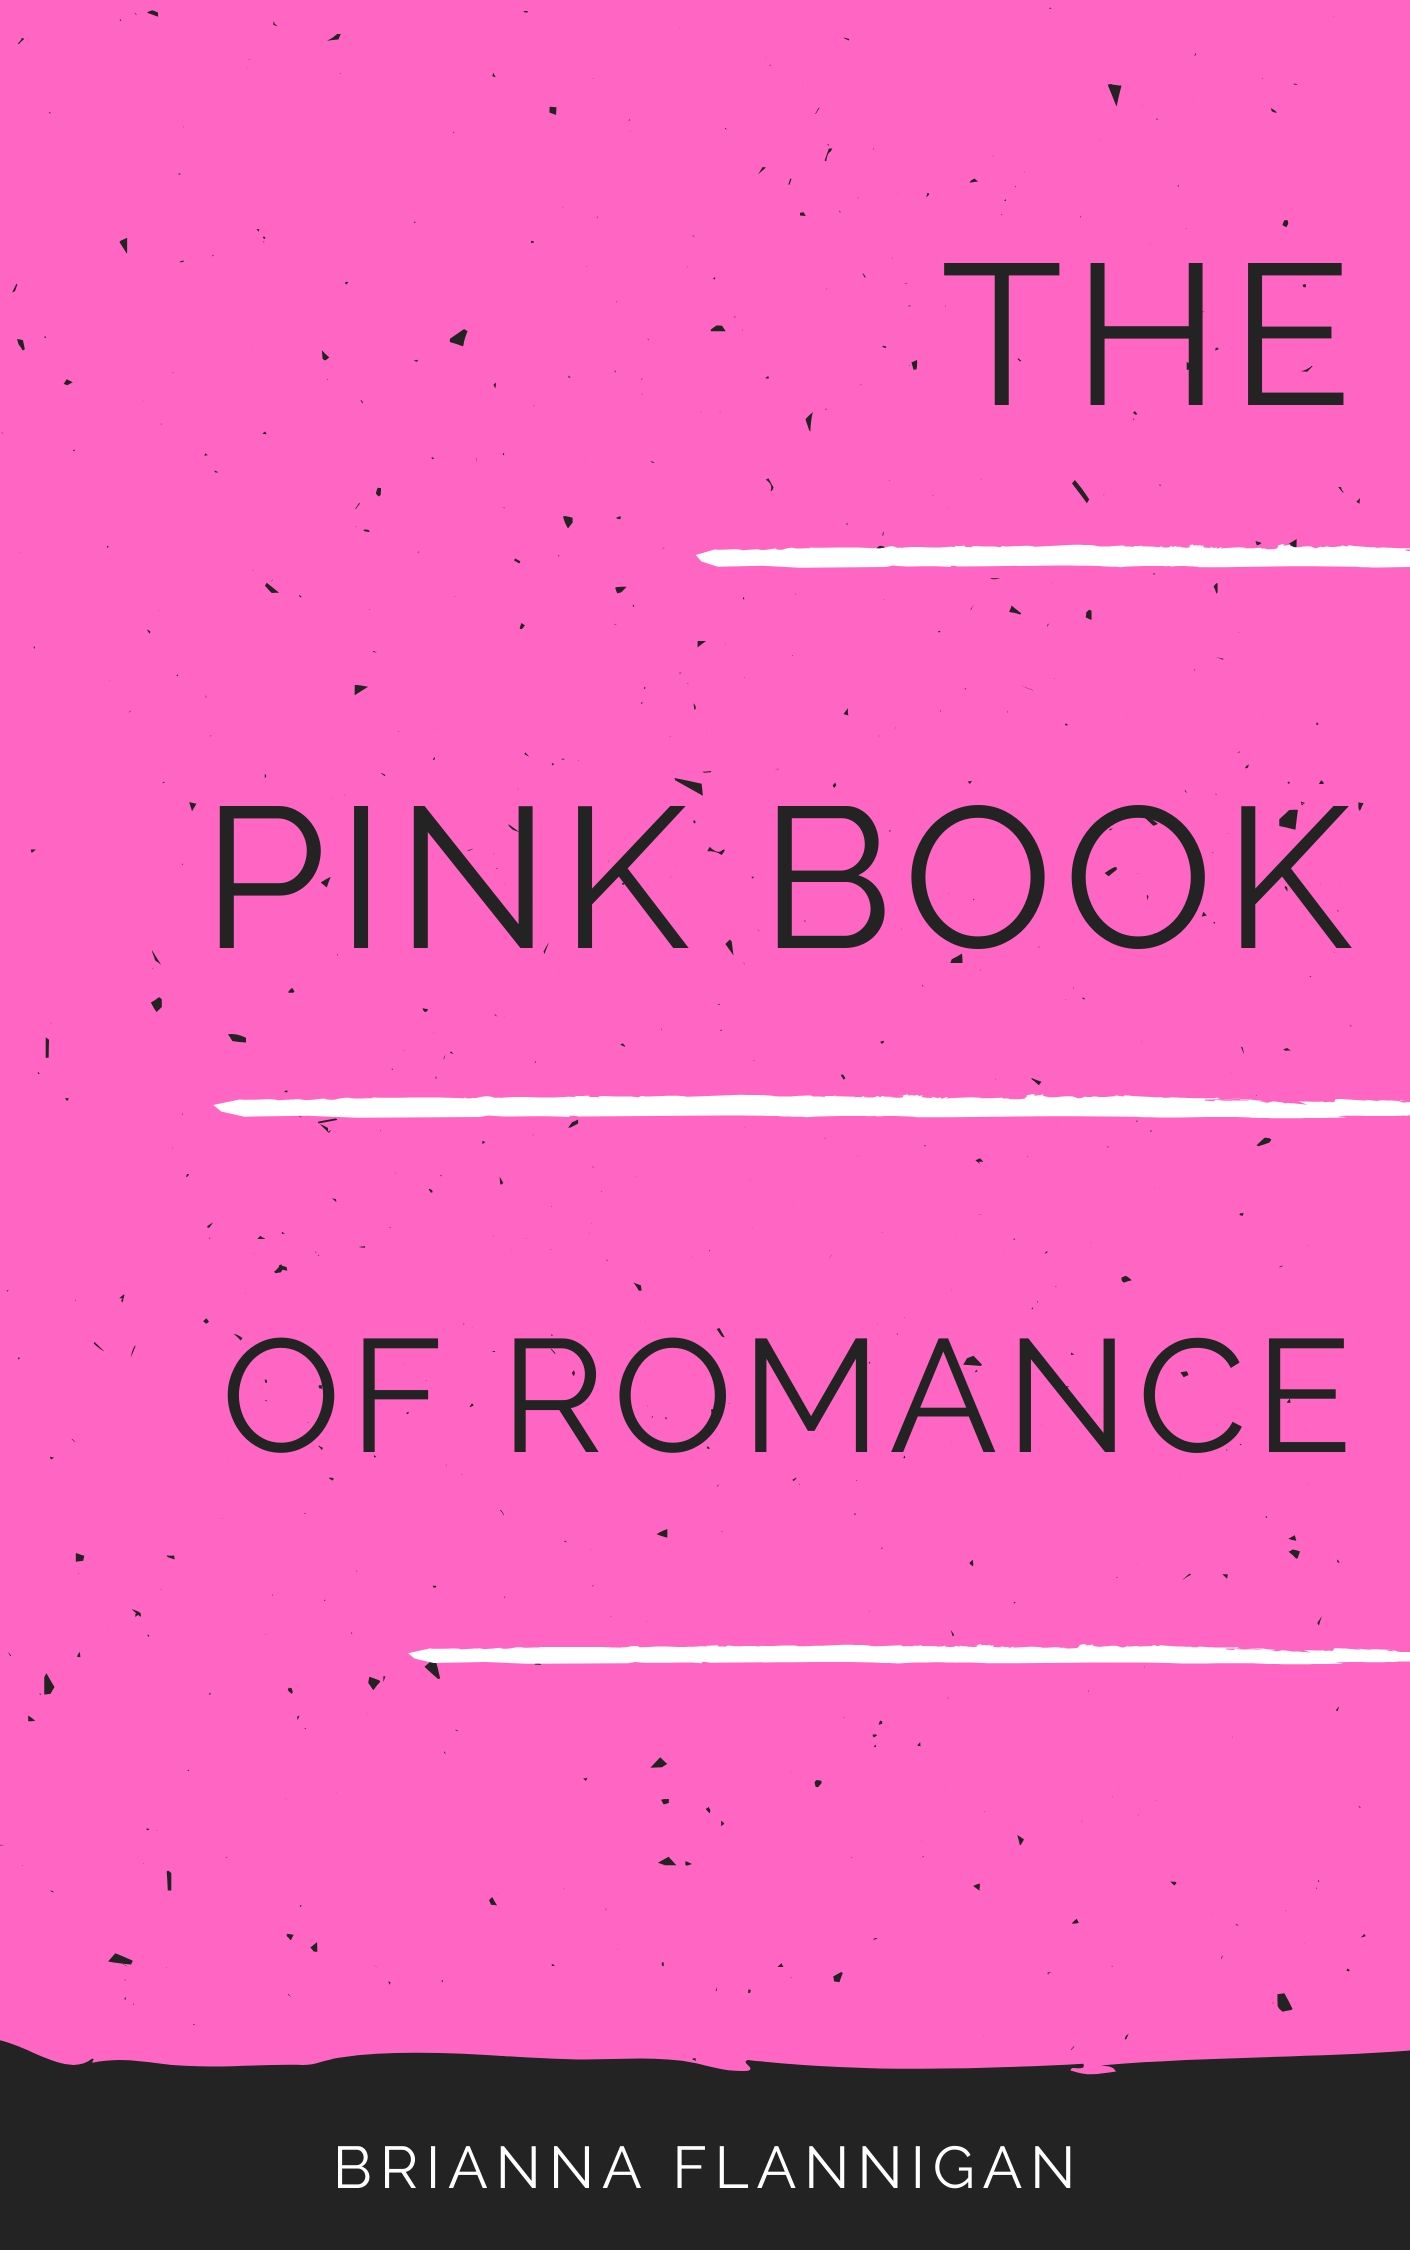 The Pink Book of Romance